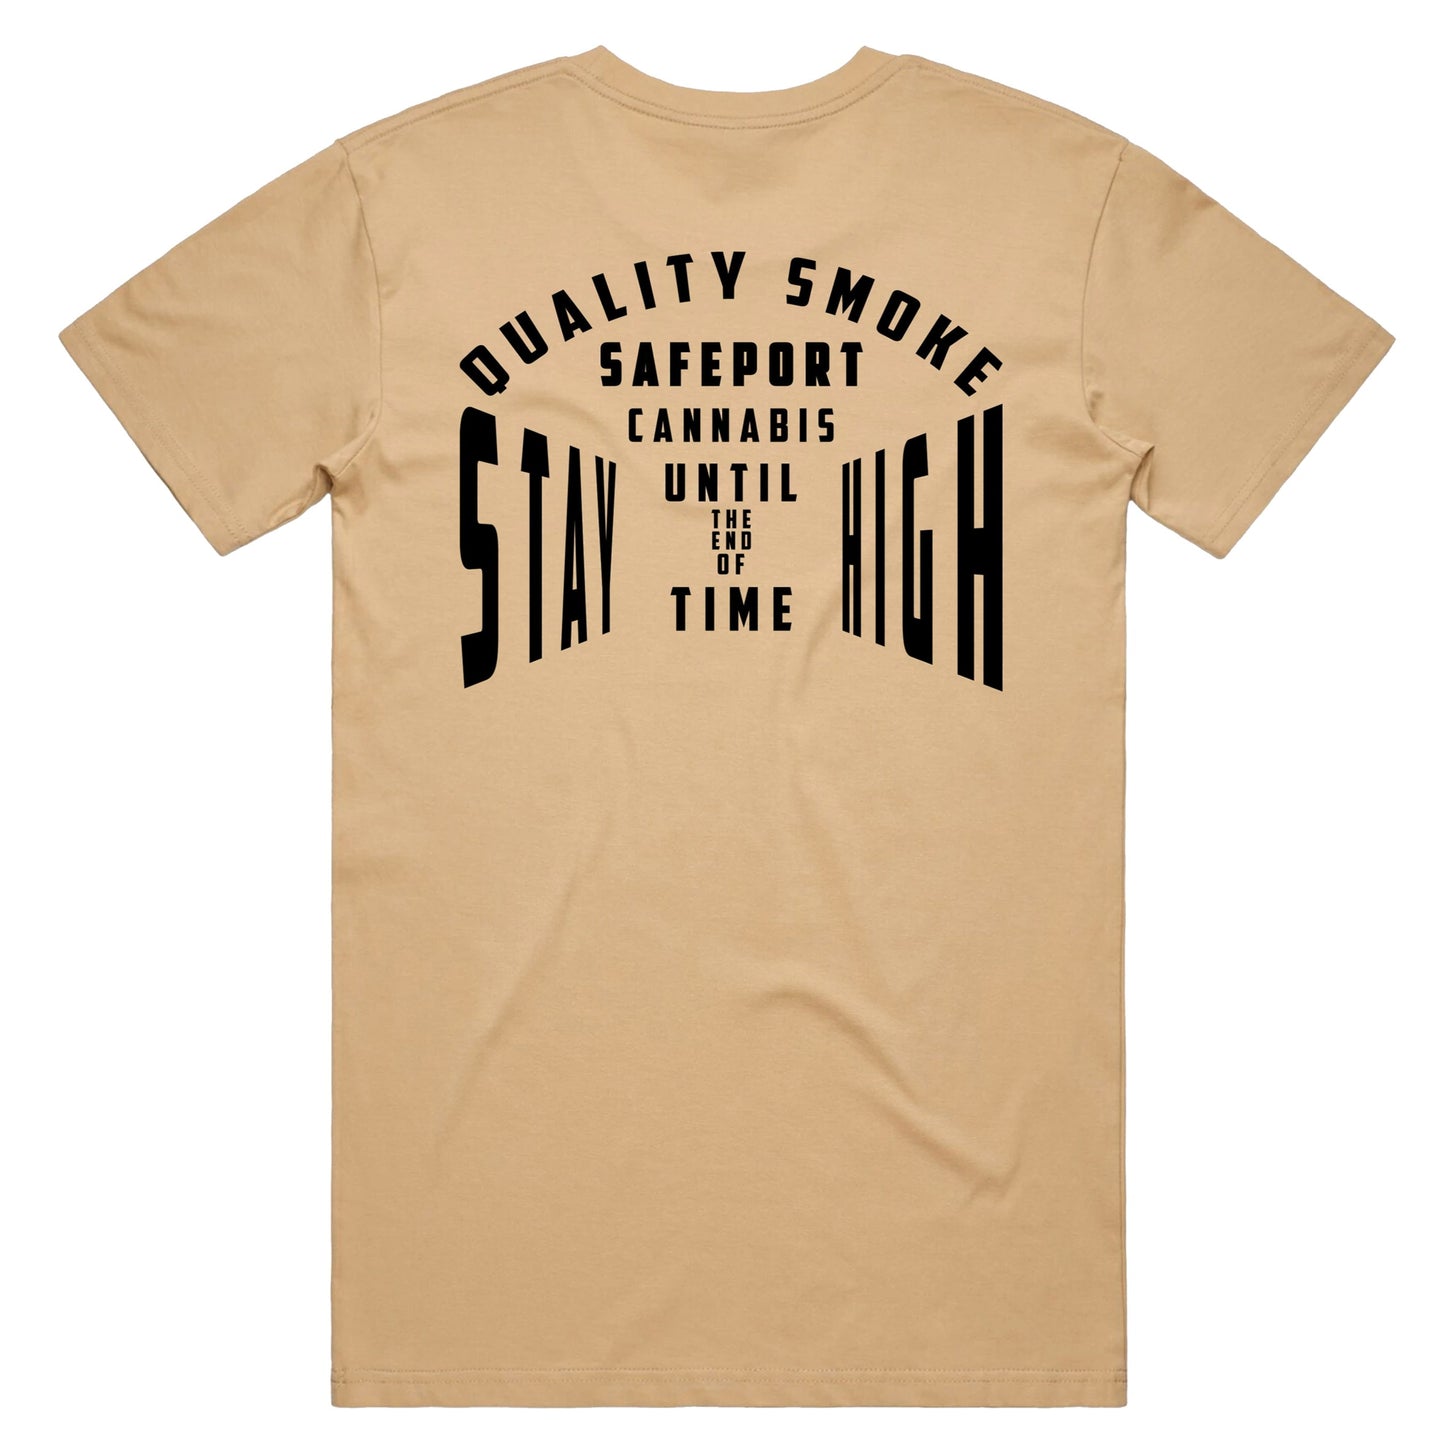 Stay High Till The End Of Time Tee